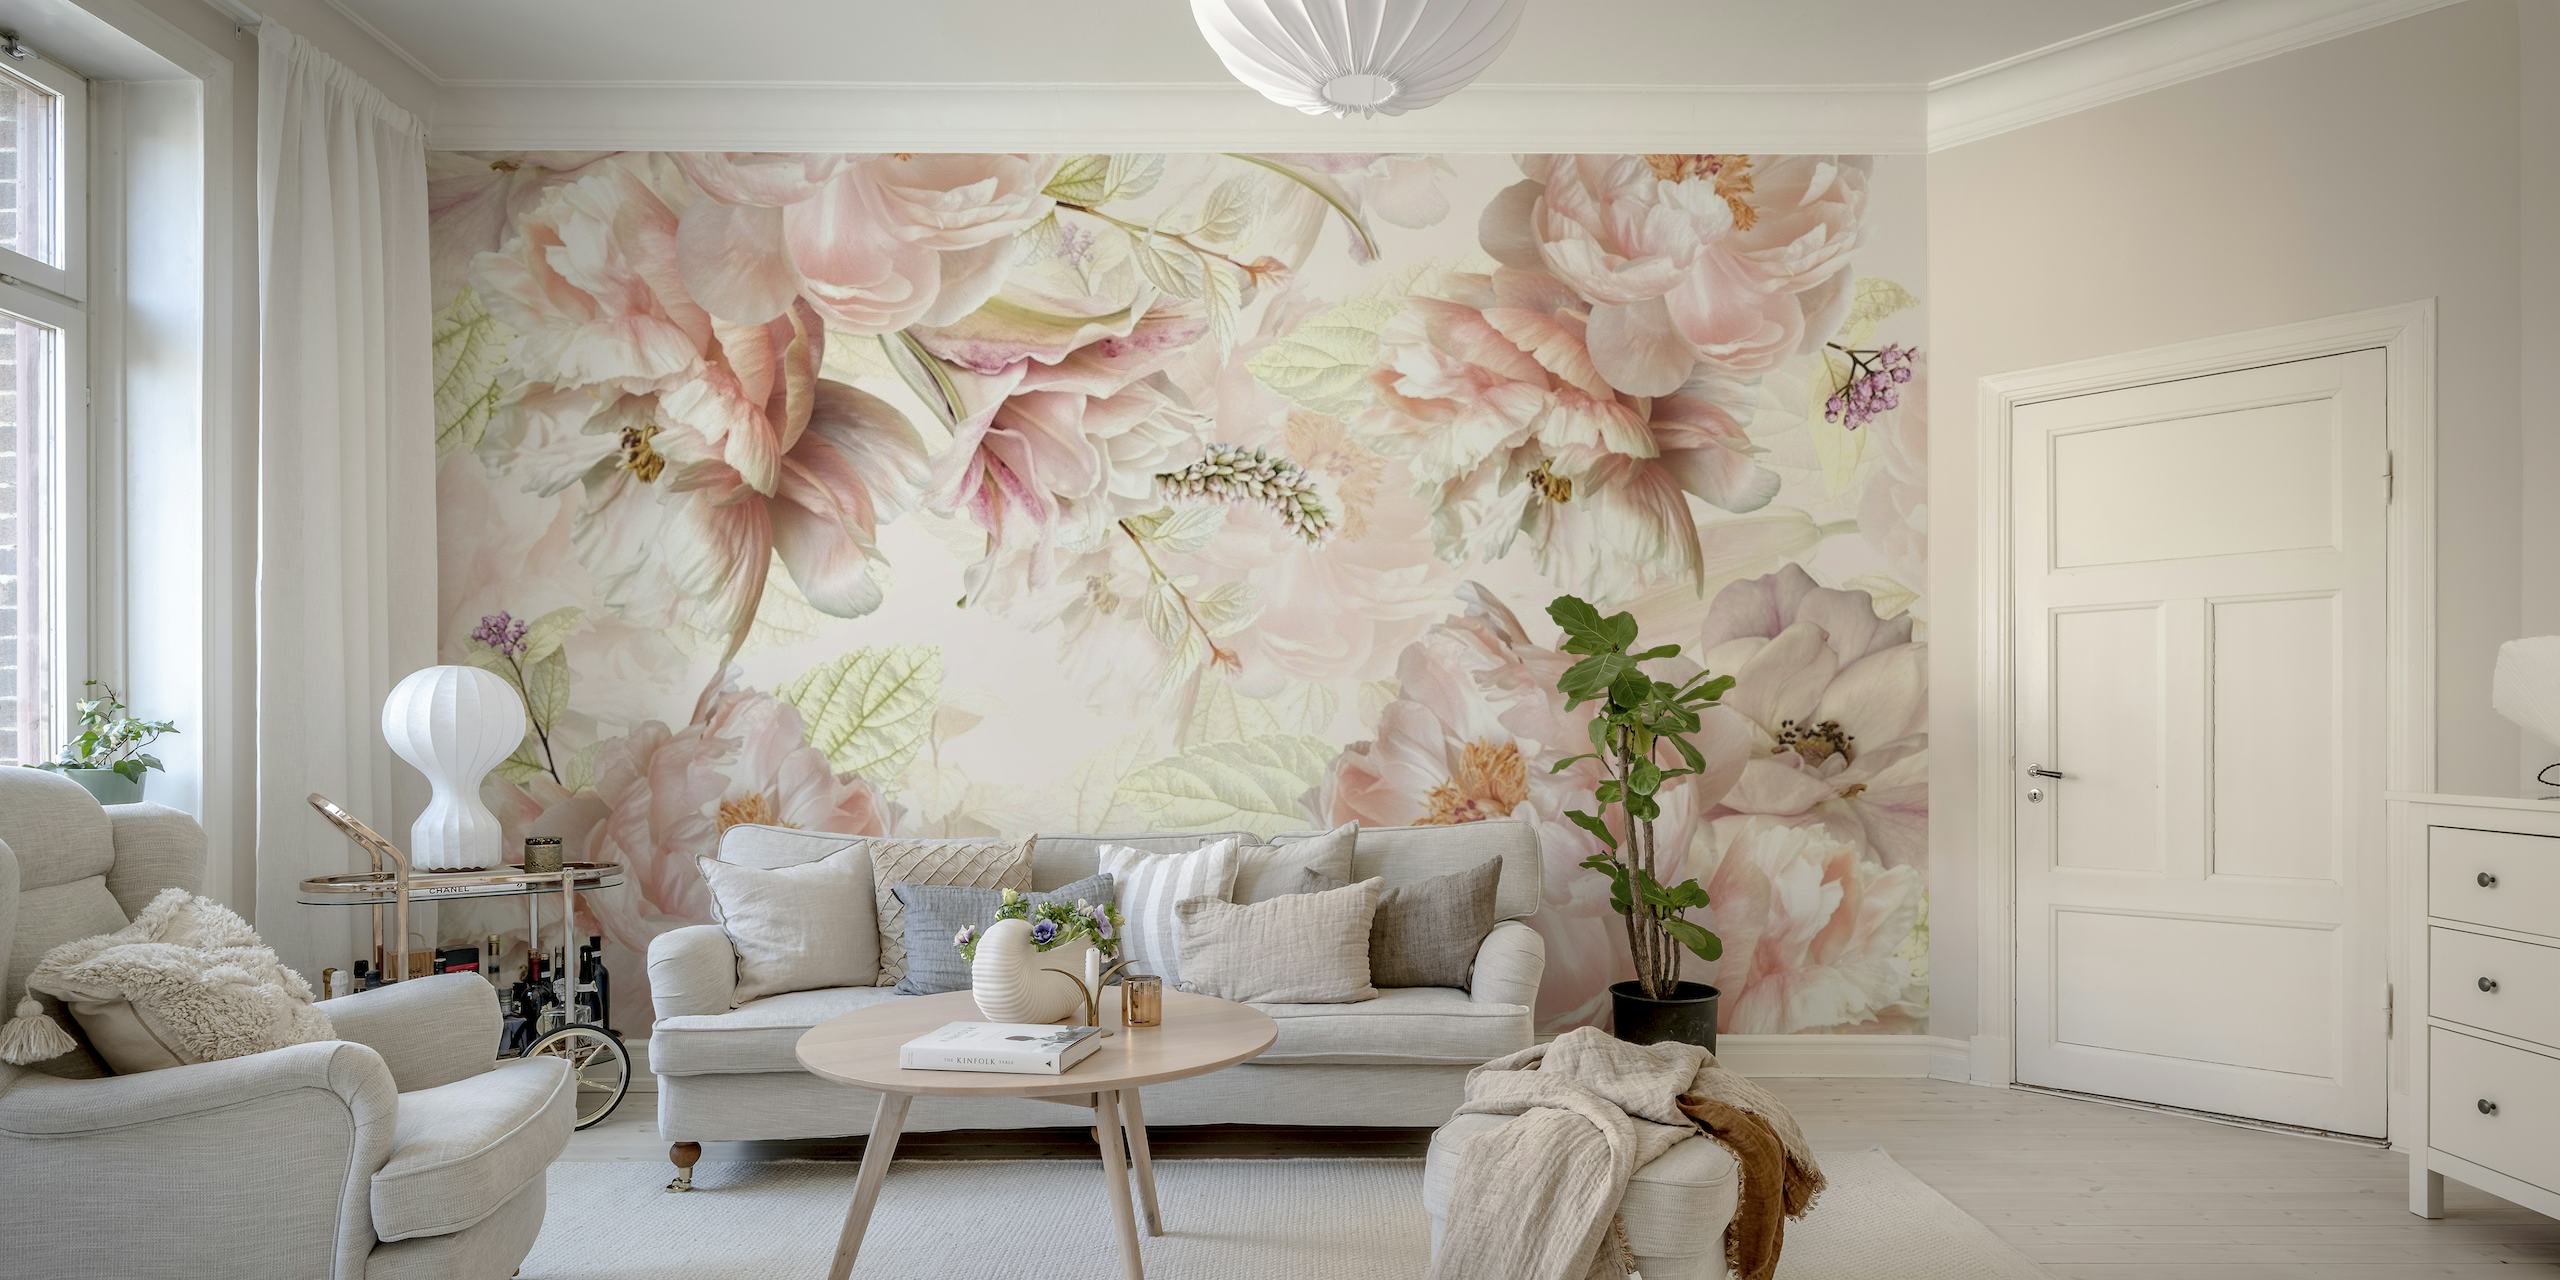 Baroque-style peony wall mural with summer garden theme